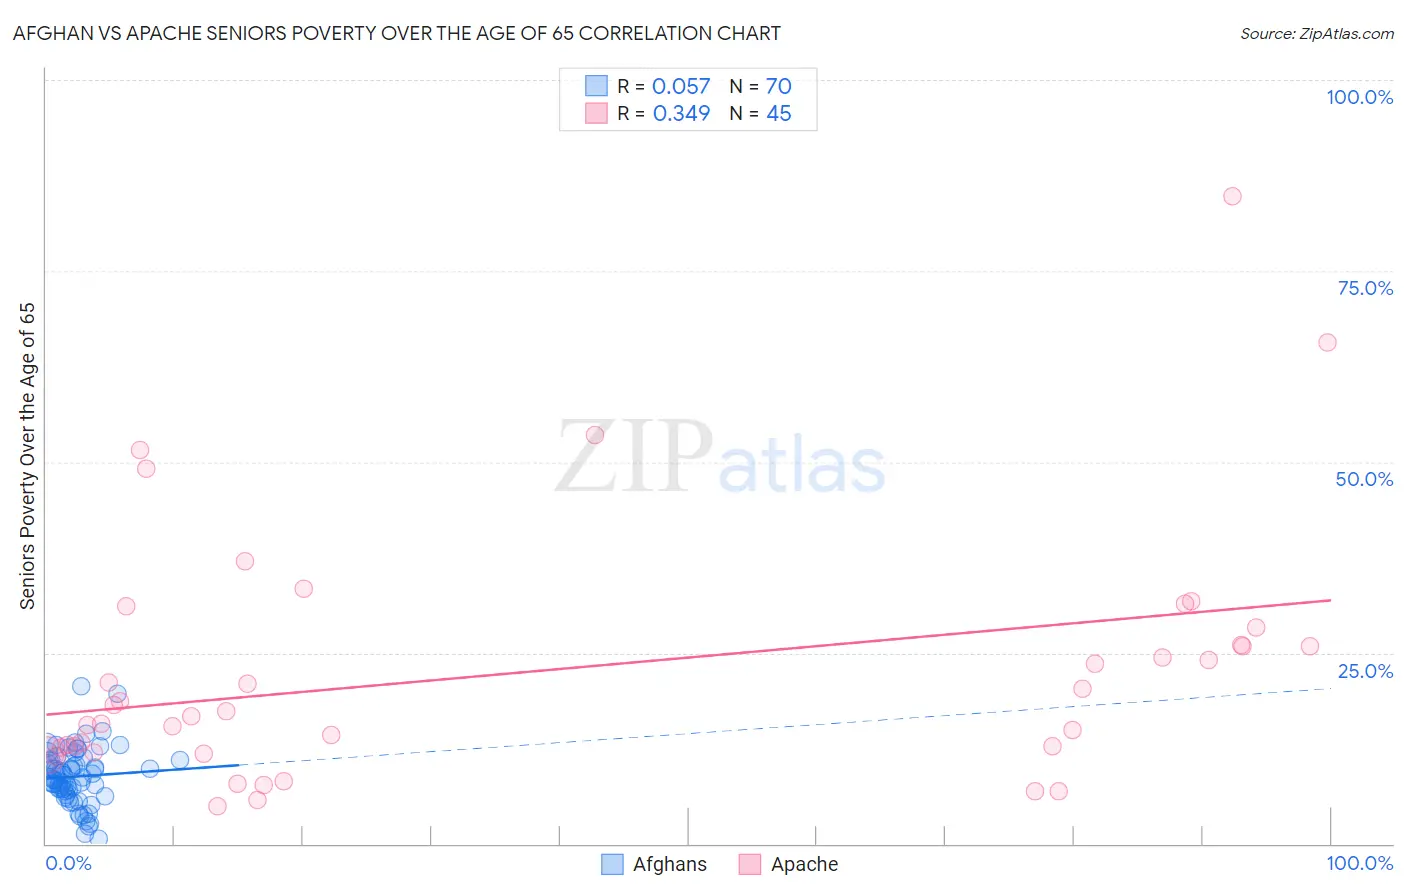 Afghan vs Apache Seniors Poverty Over the Age of 65